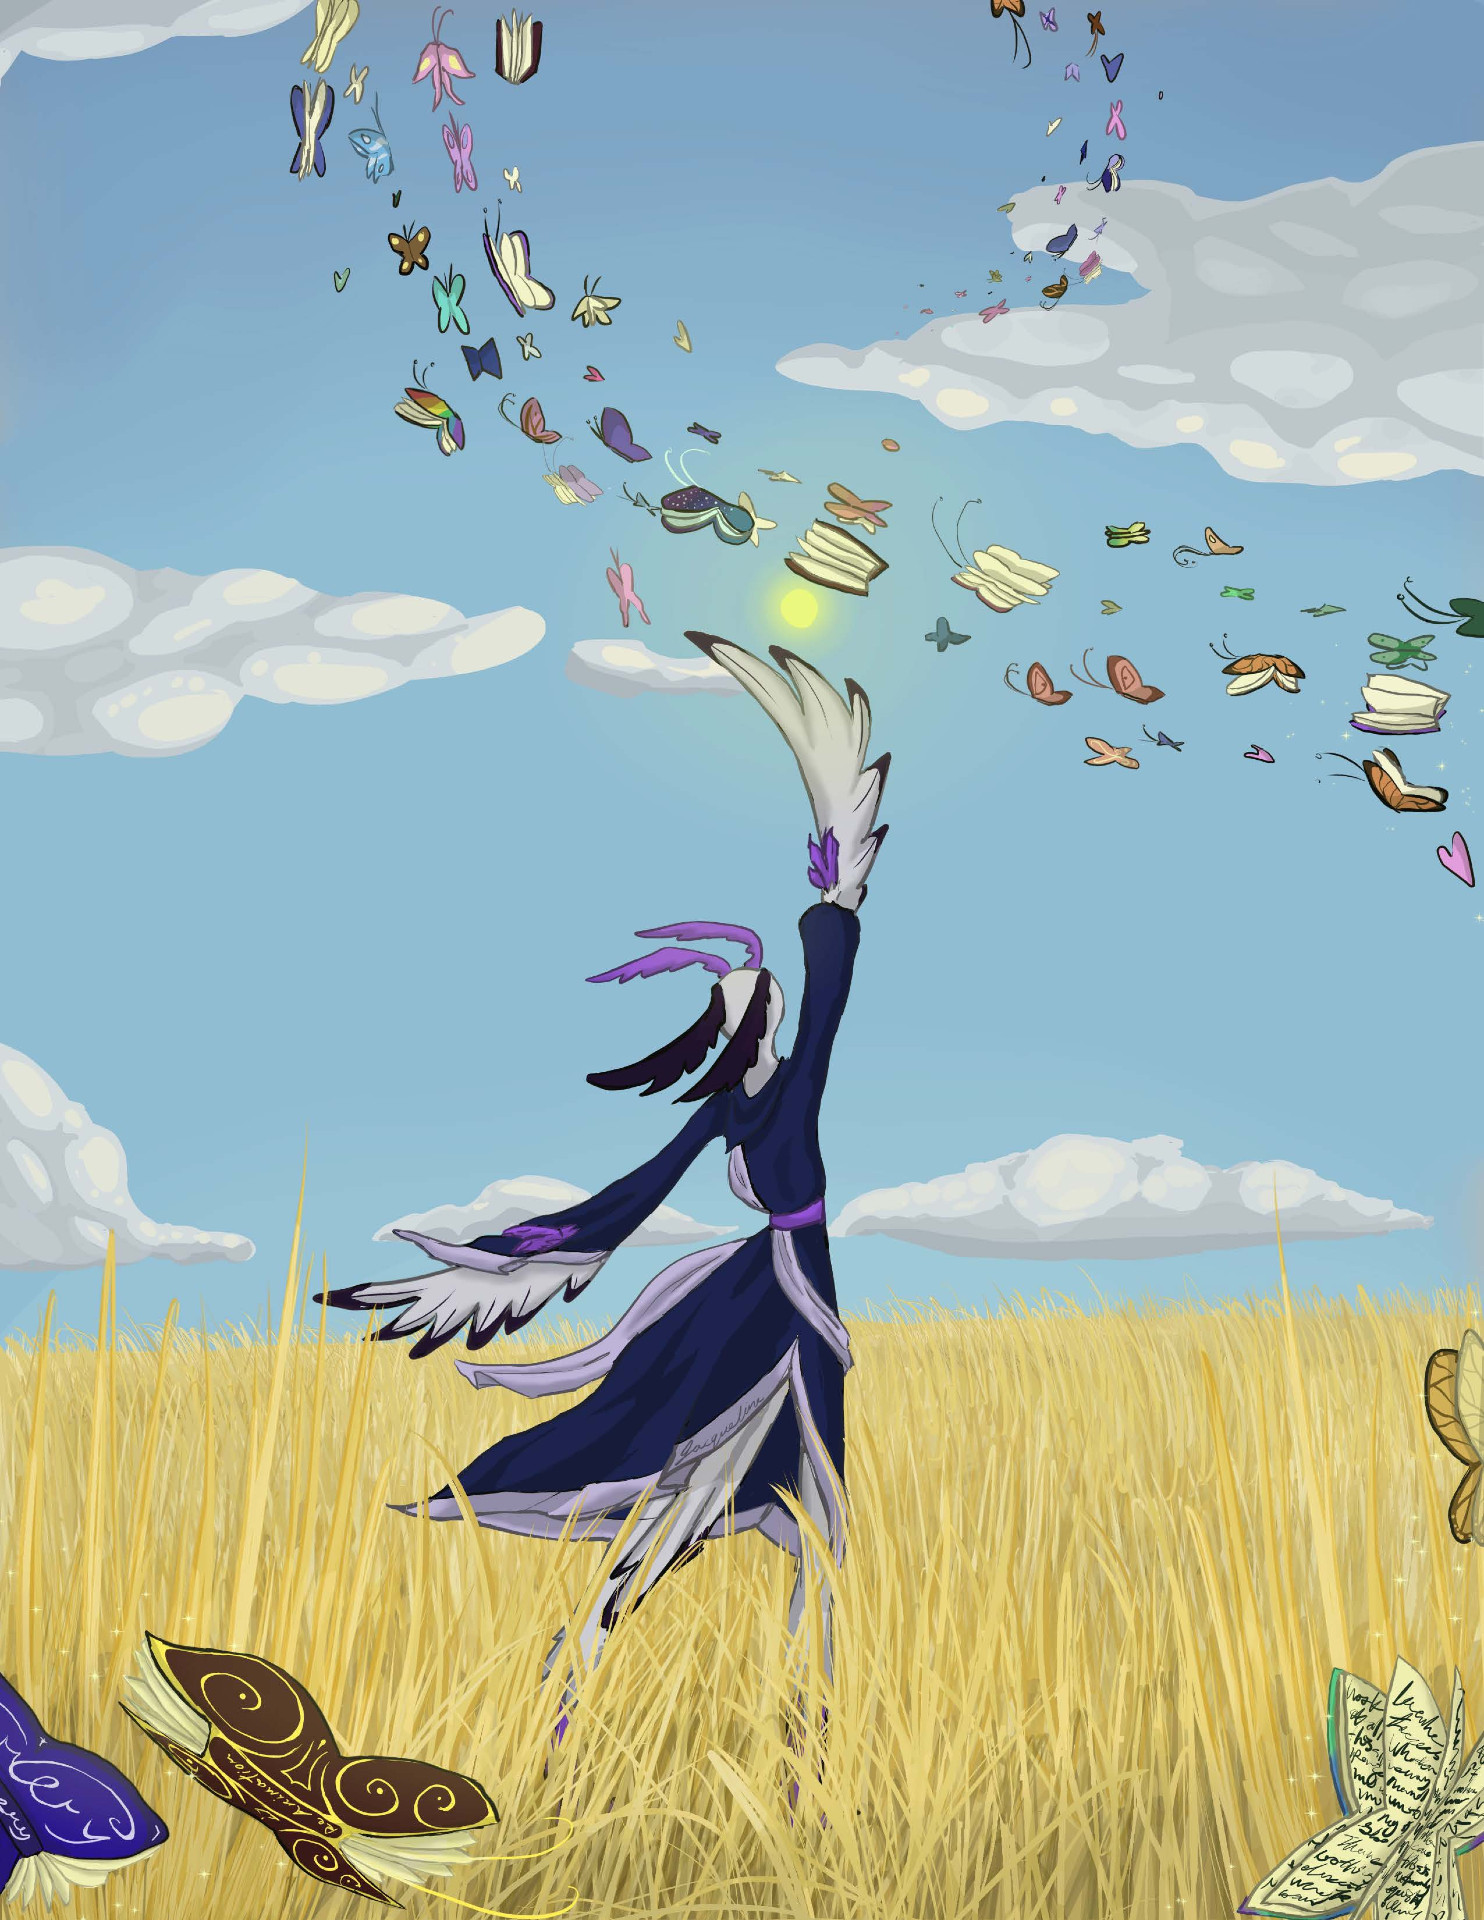 Art showing a person standing in a field with butterflies fluttering around in the sky